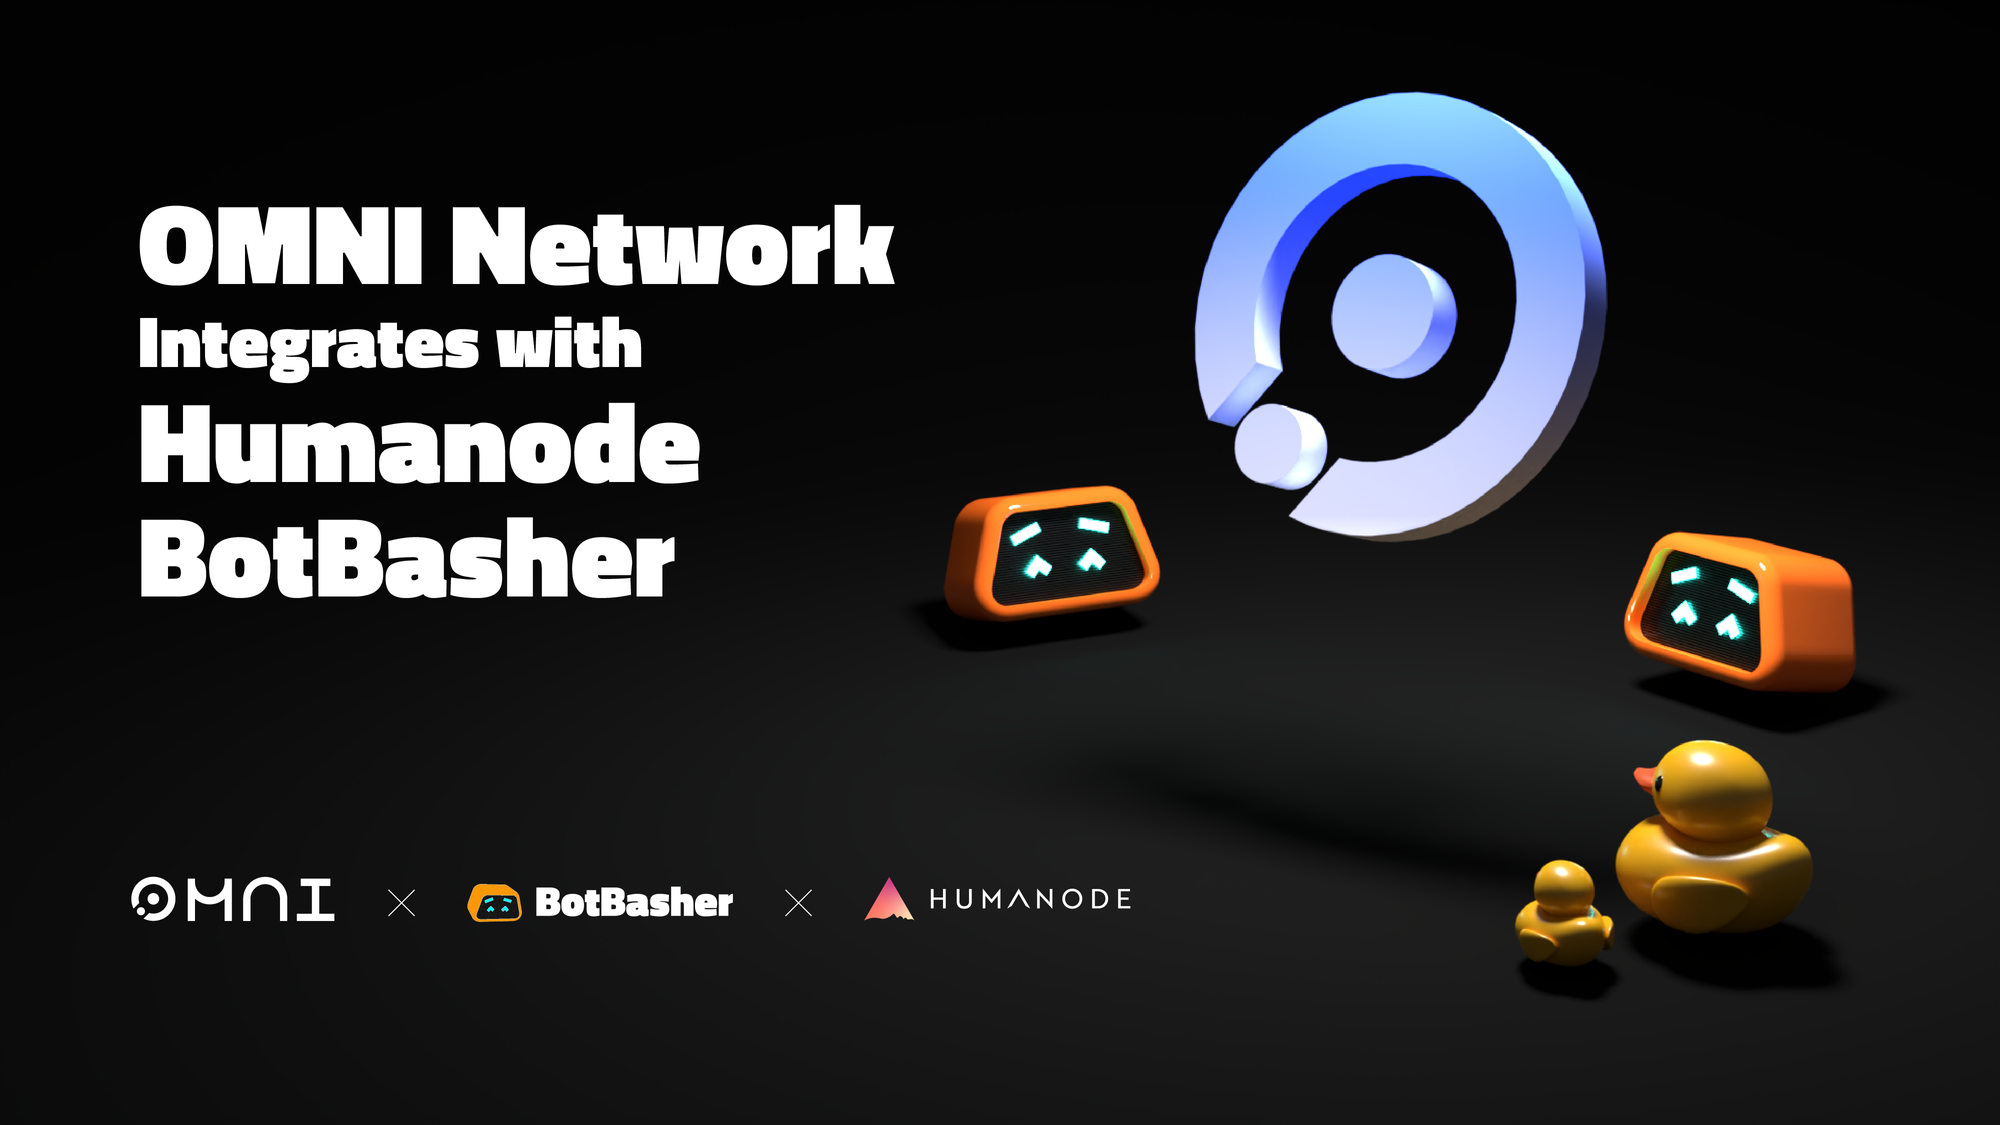 Omni Network integrates with Humanode BotBasher